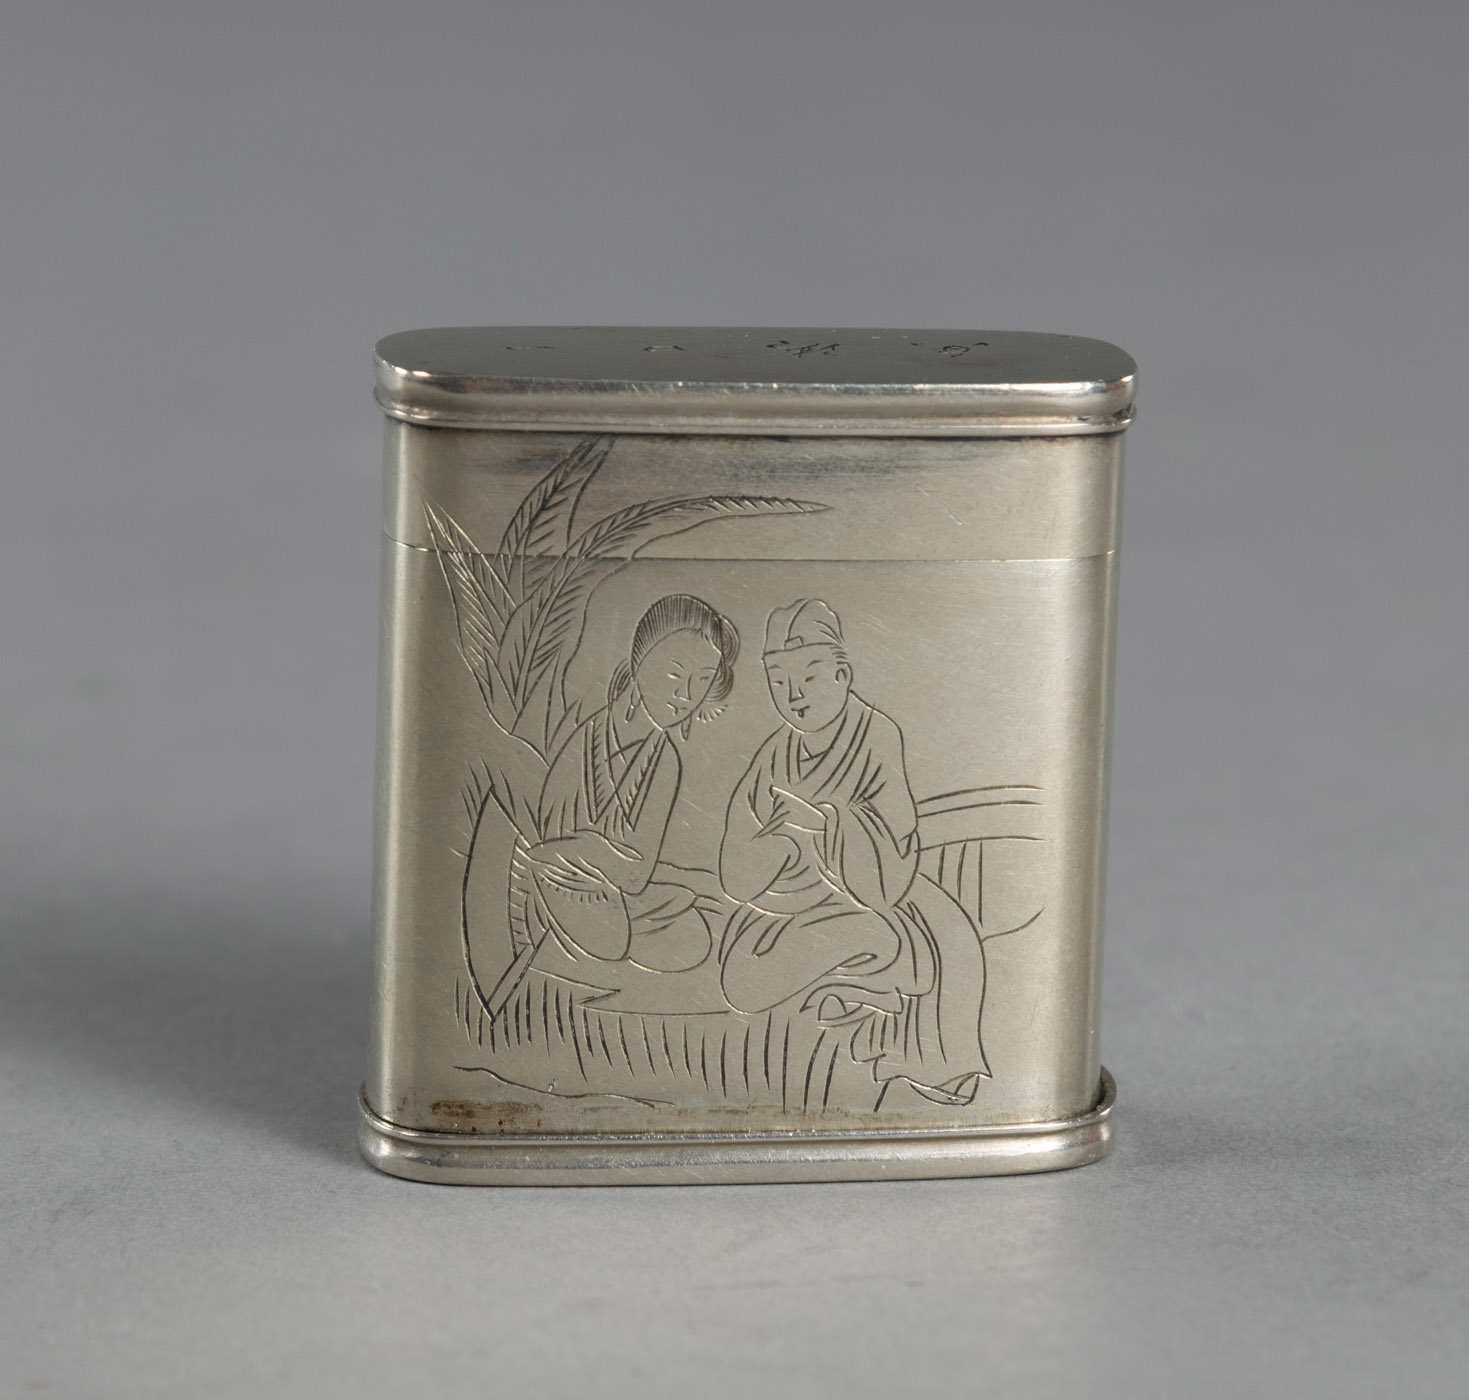 <b>A SAMLL PAKTONG TROPE L'OEIL COVERED CASE DEPICTING EROTIC SCENES, ENGRAVED WITH A POEM INSCRIPTION</b>